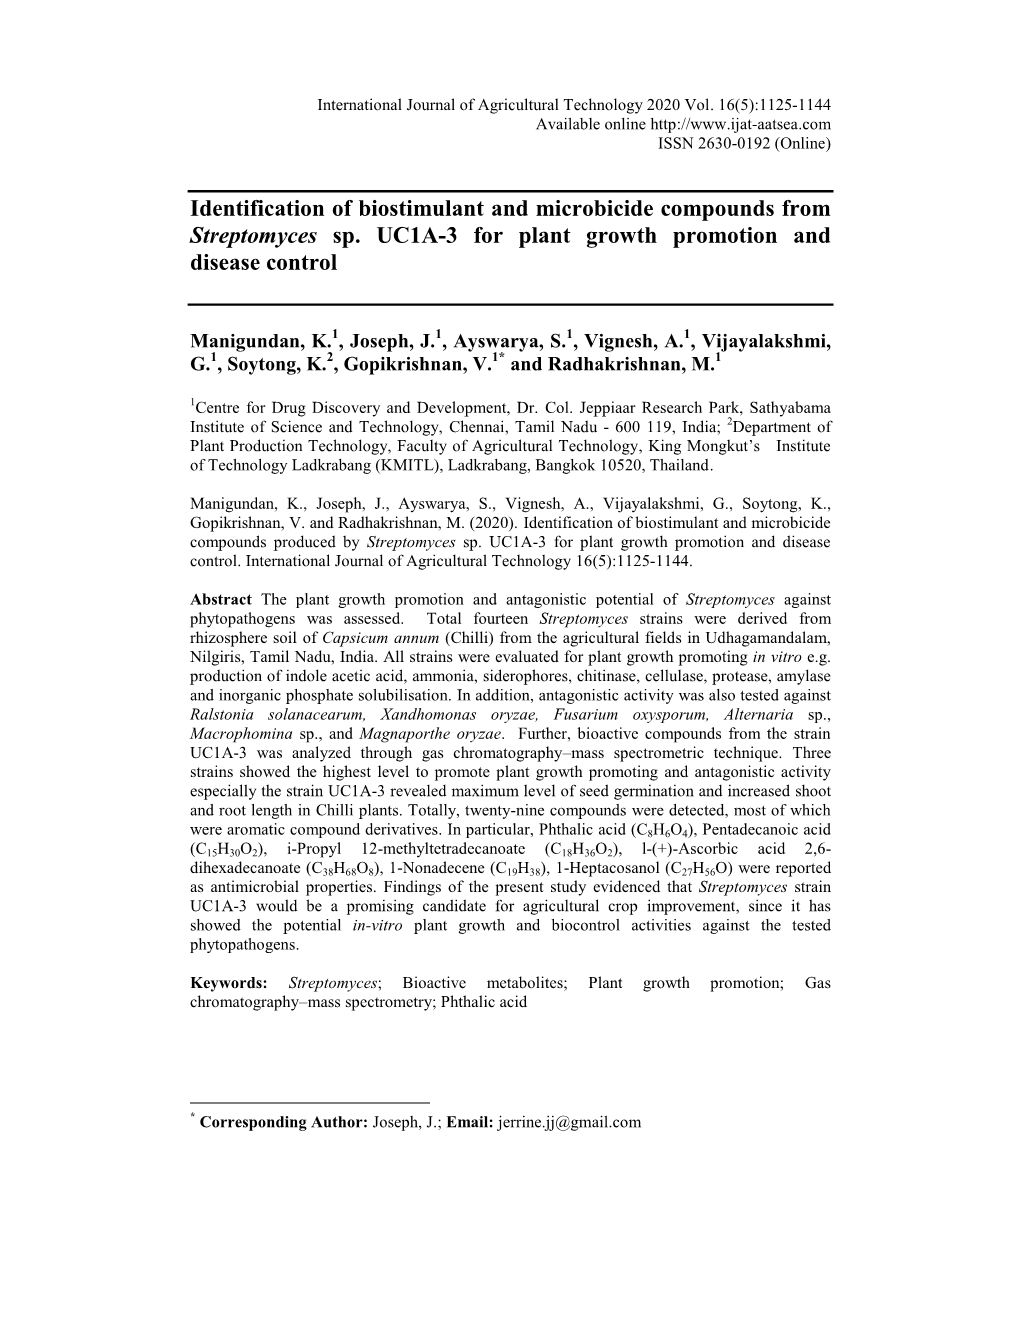 Identification of Biostimulant and Microbicide Compounds from Streptomyces Sp